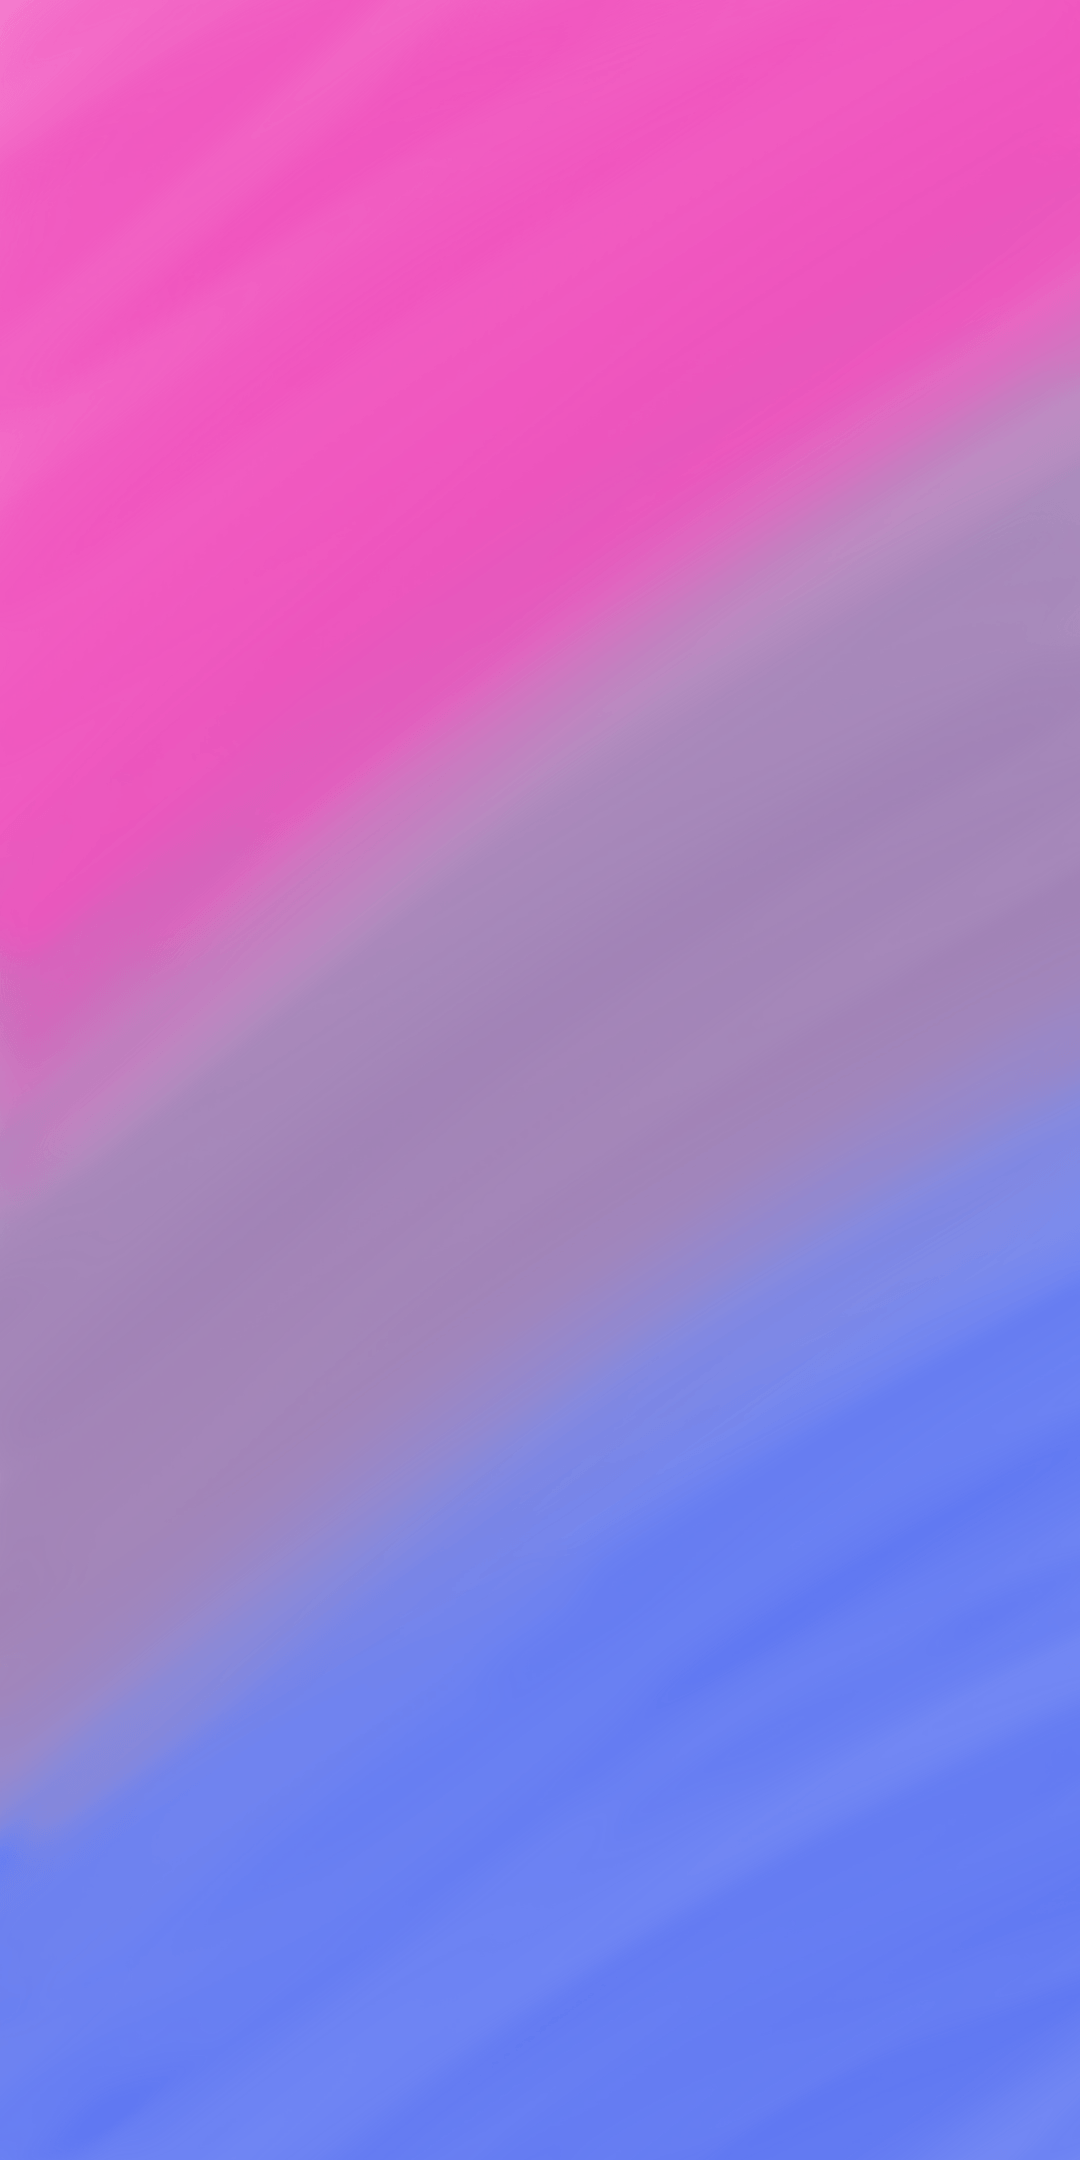 Couldn't find a bi colors wallpaper that wasn't too obvious (not fully out) so I made one. Anyone is welcome to use!: bisexual